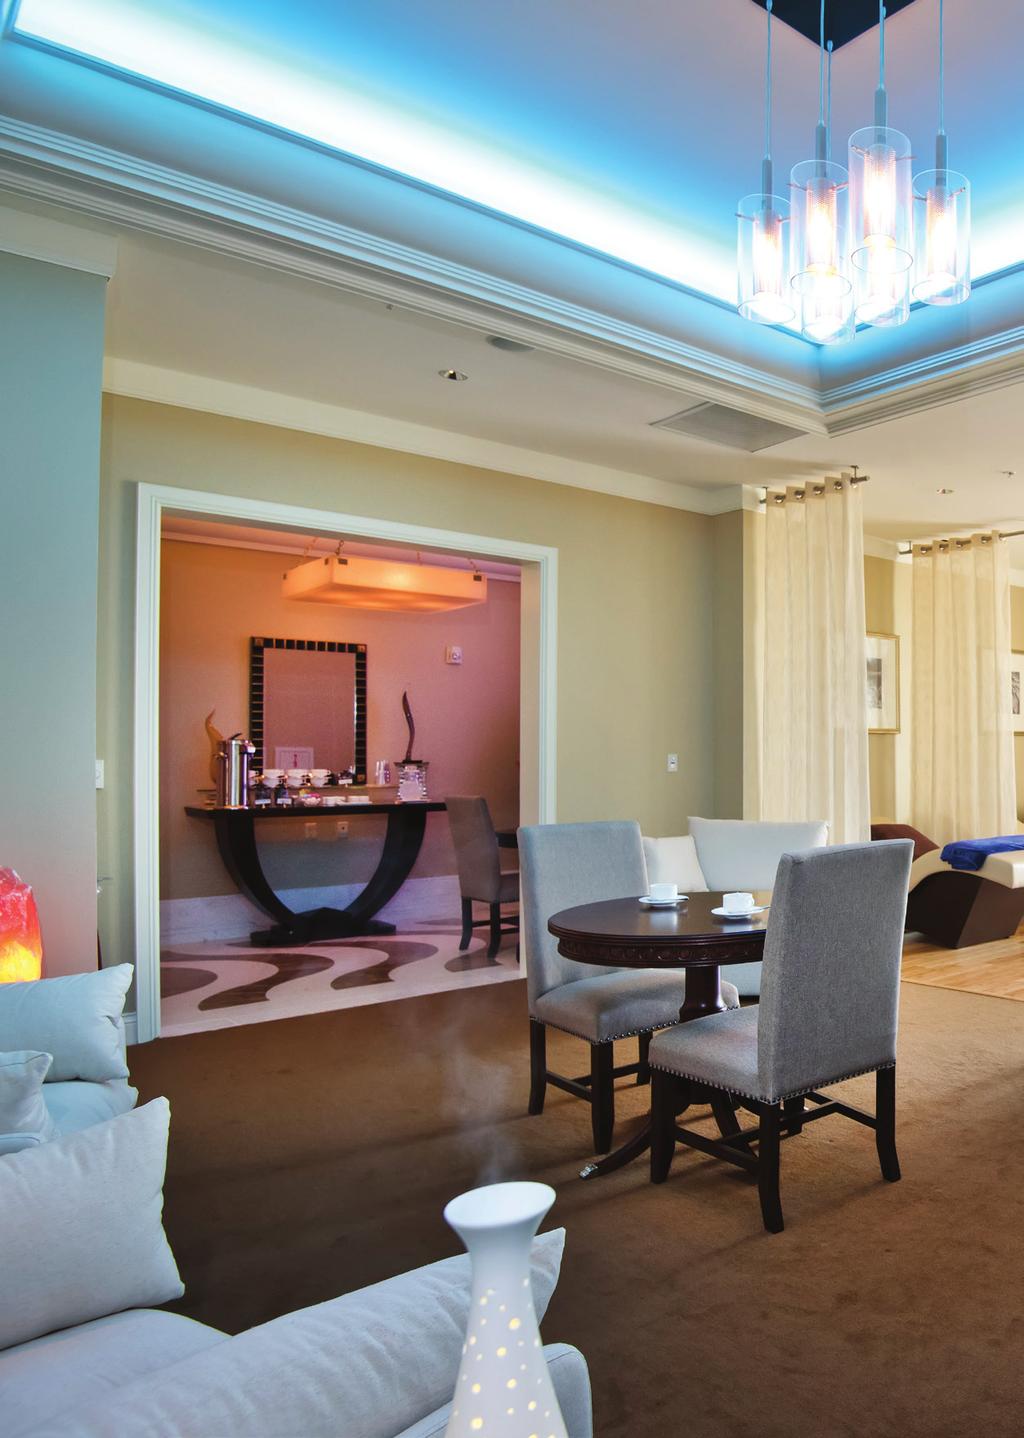 INSPIRATIONAL ENVIRONMENT At the Waldorf Astoria Orlando the natural beauty and sophisticated serenity of the surrounding environments promote inspiration and well-being throughout